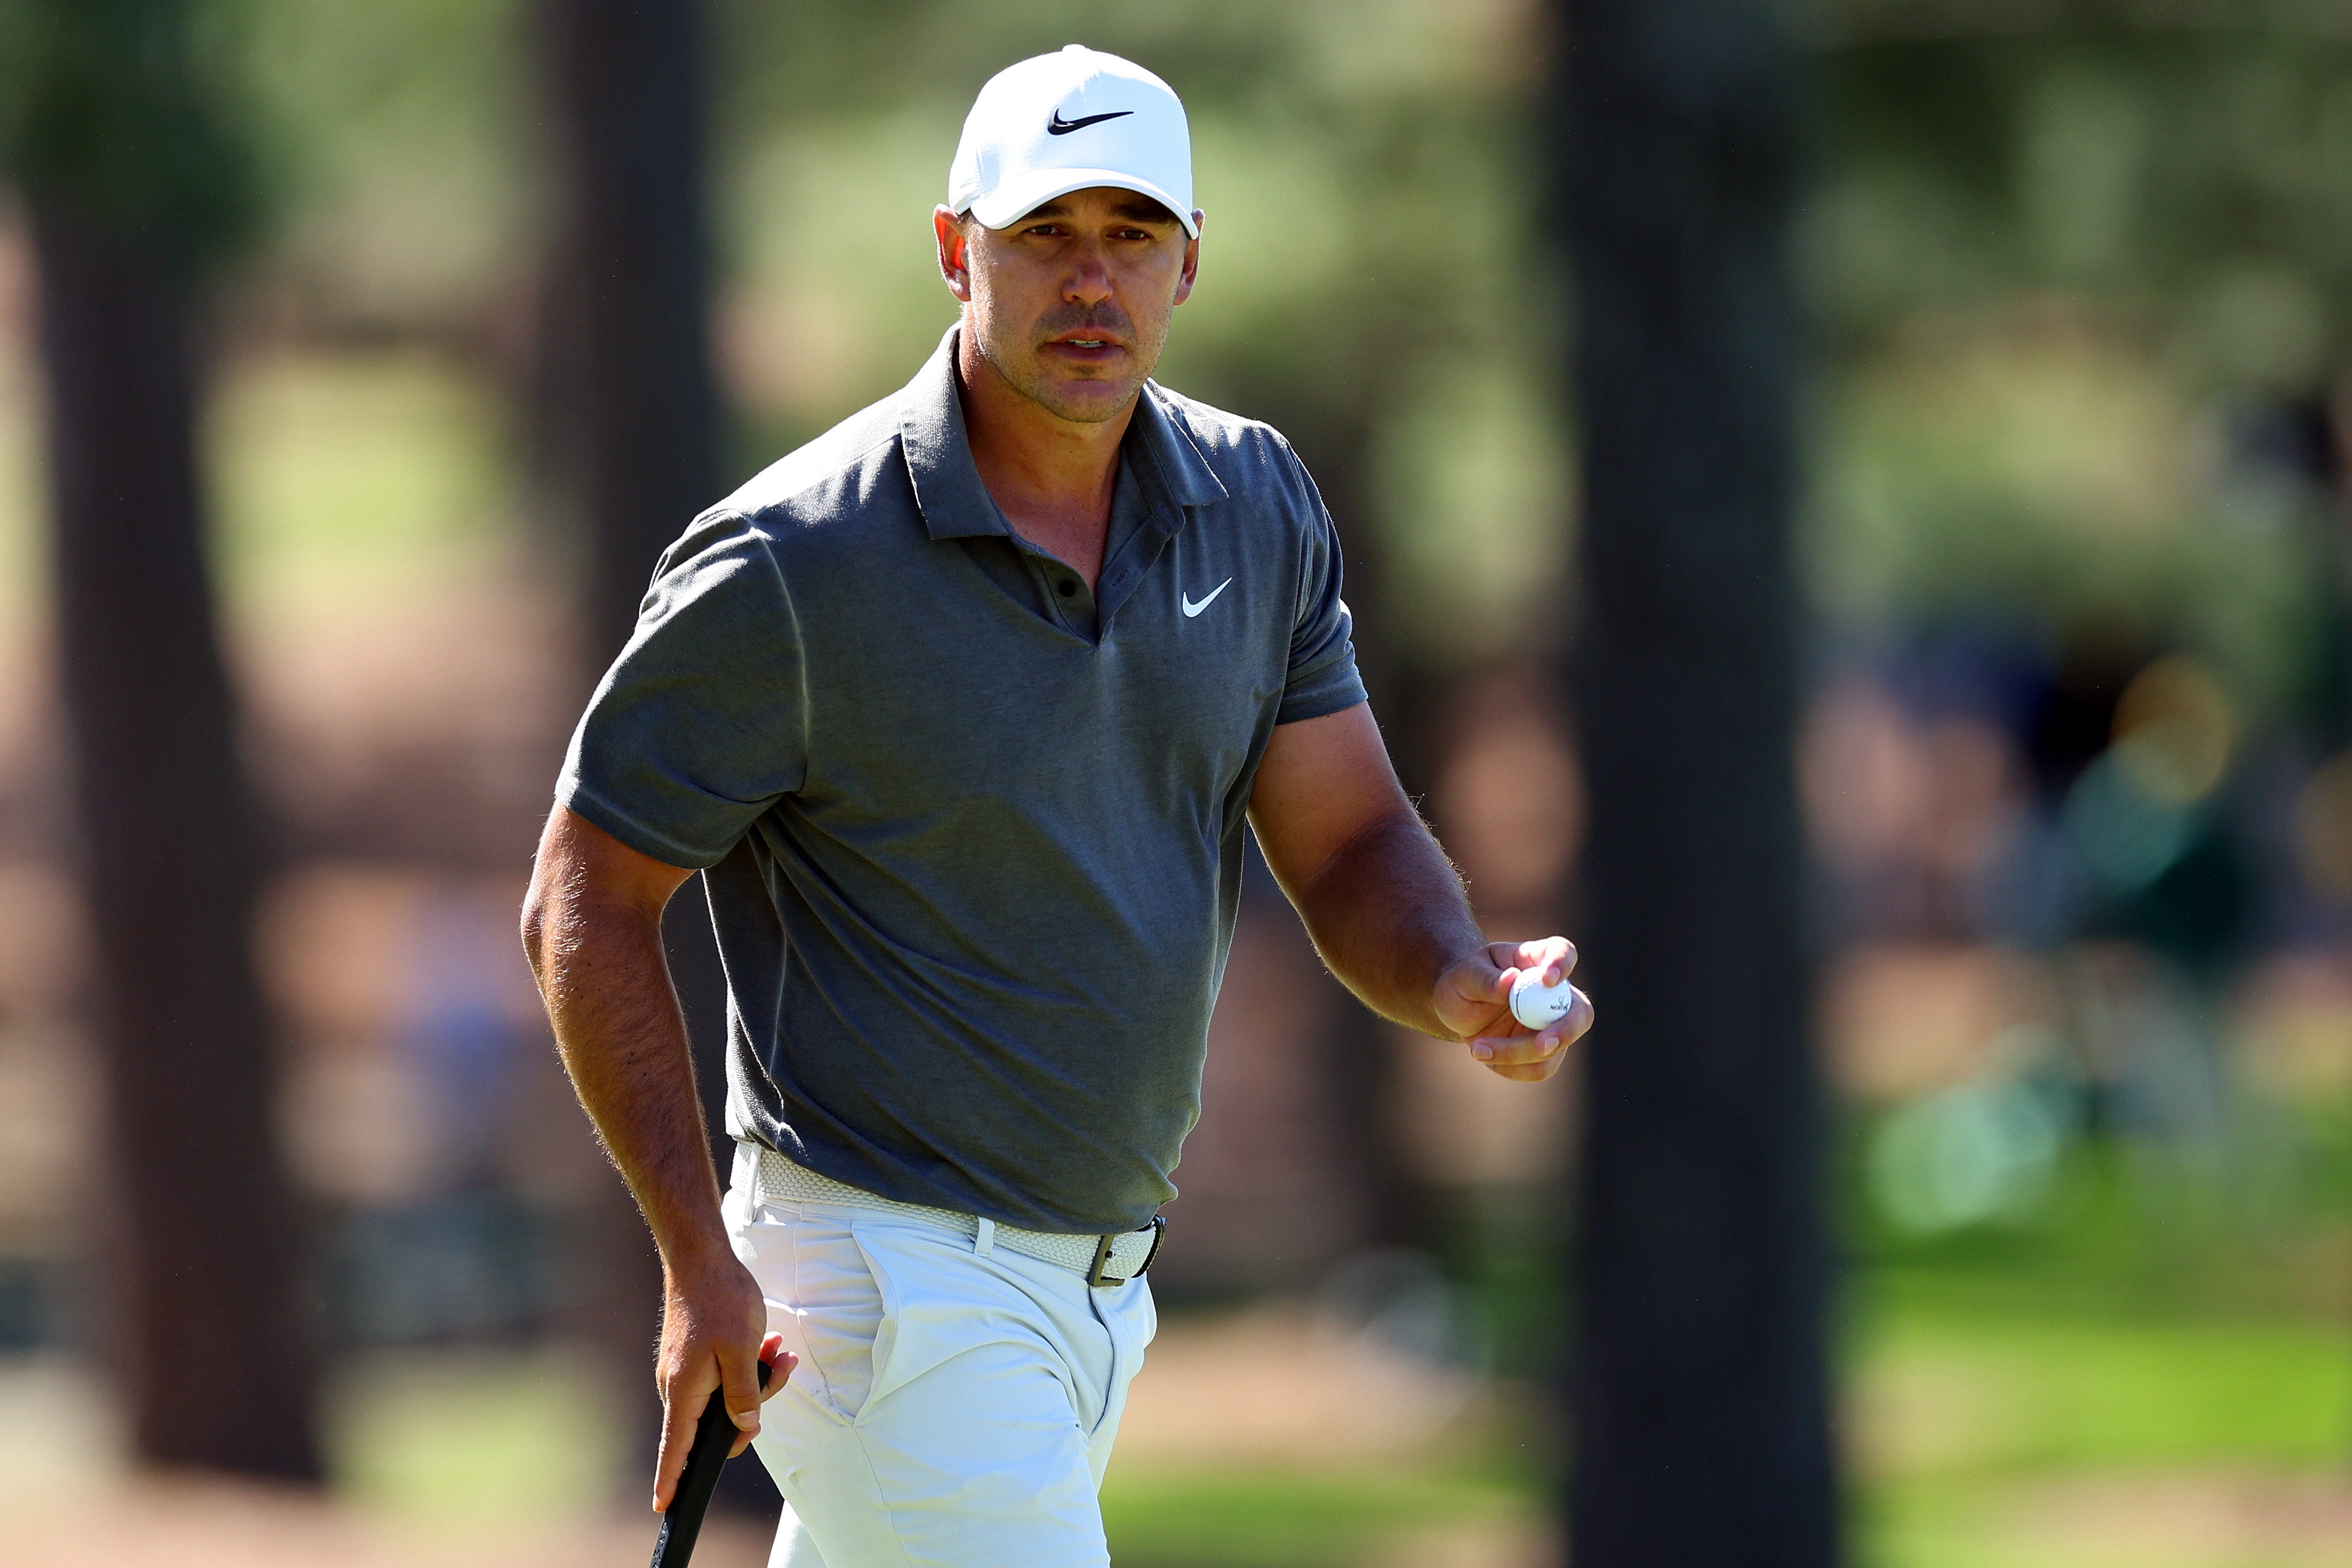 Brooks Koepka came close to winning the Masters and has triumphed on the LIV Golf circuit this season